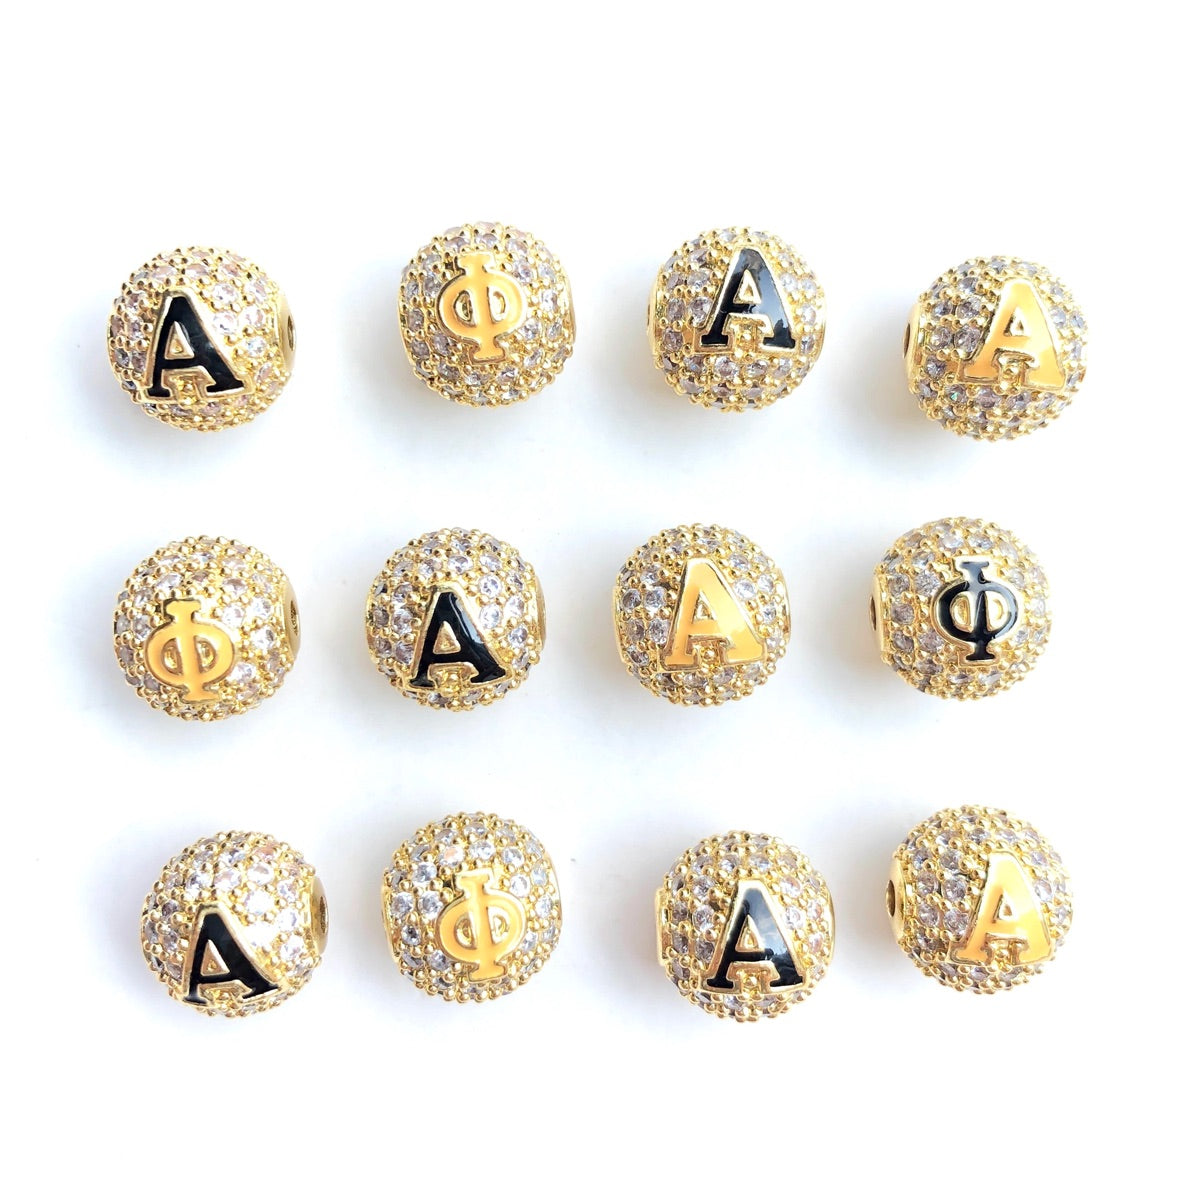 12pcs/lot 10mm Black Yellow Enamel CZ Paved A, Φ Initial Alphabet Letter Ball Spacers Beads Mix Gold Letters 8A+4Φ CZ Paved Spacers 10mm Beads Ball Beads Greek Letters New Spacers Arrivals Charms Beads Beyond